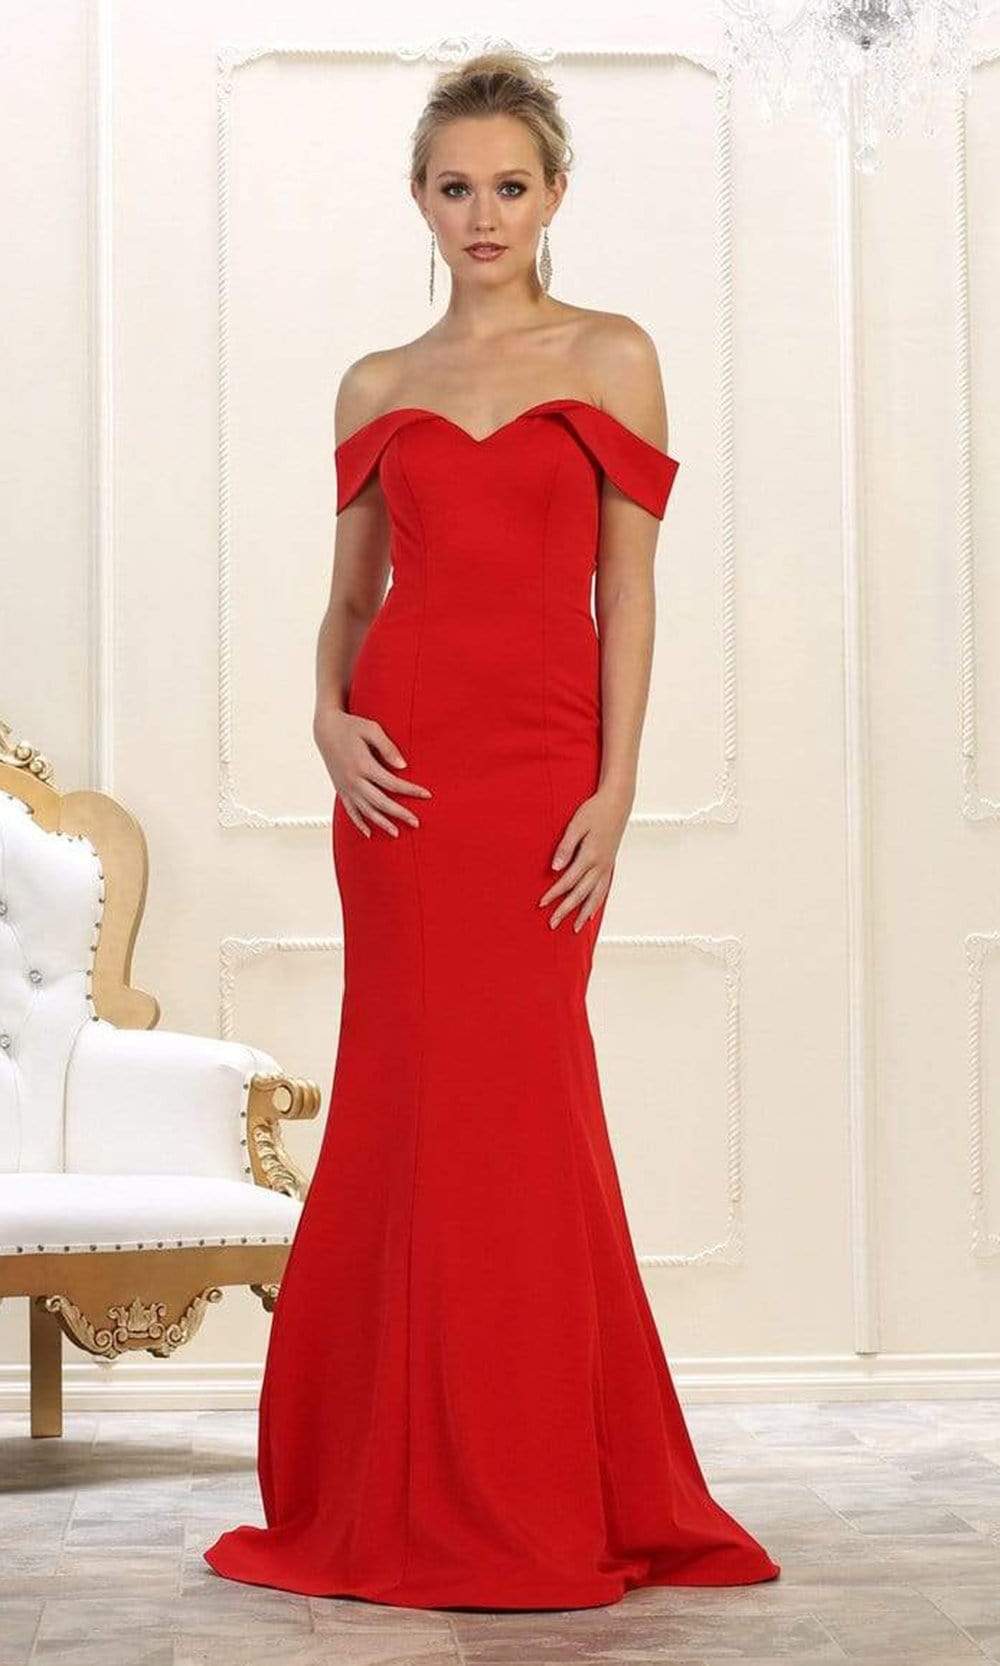 May Queen - MQ1547 Off Shoulder Mermaid Evening Gown
